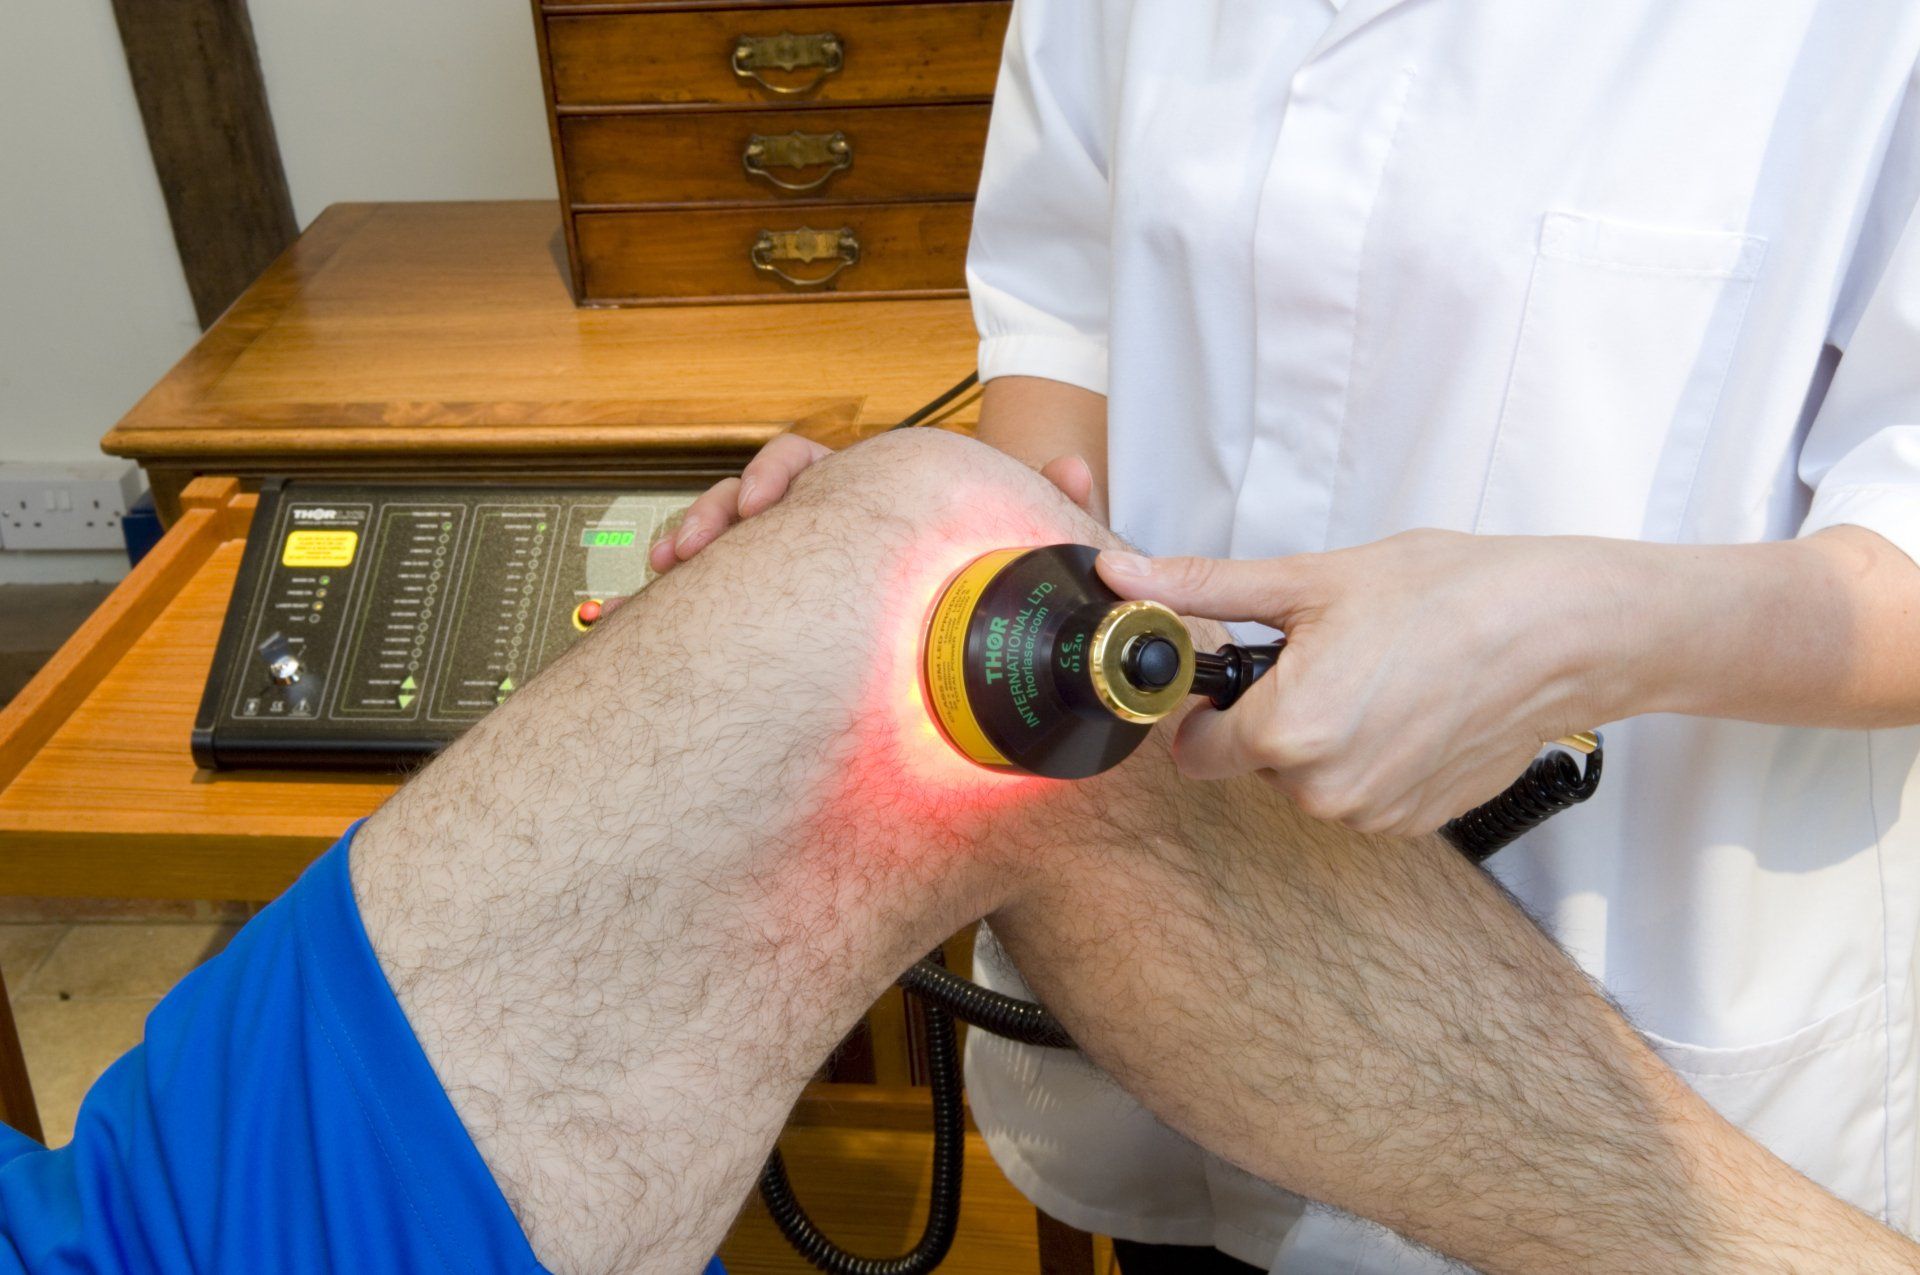 a person is getting a laser treatment on their knee